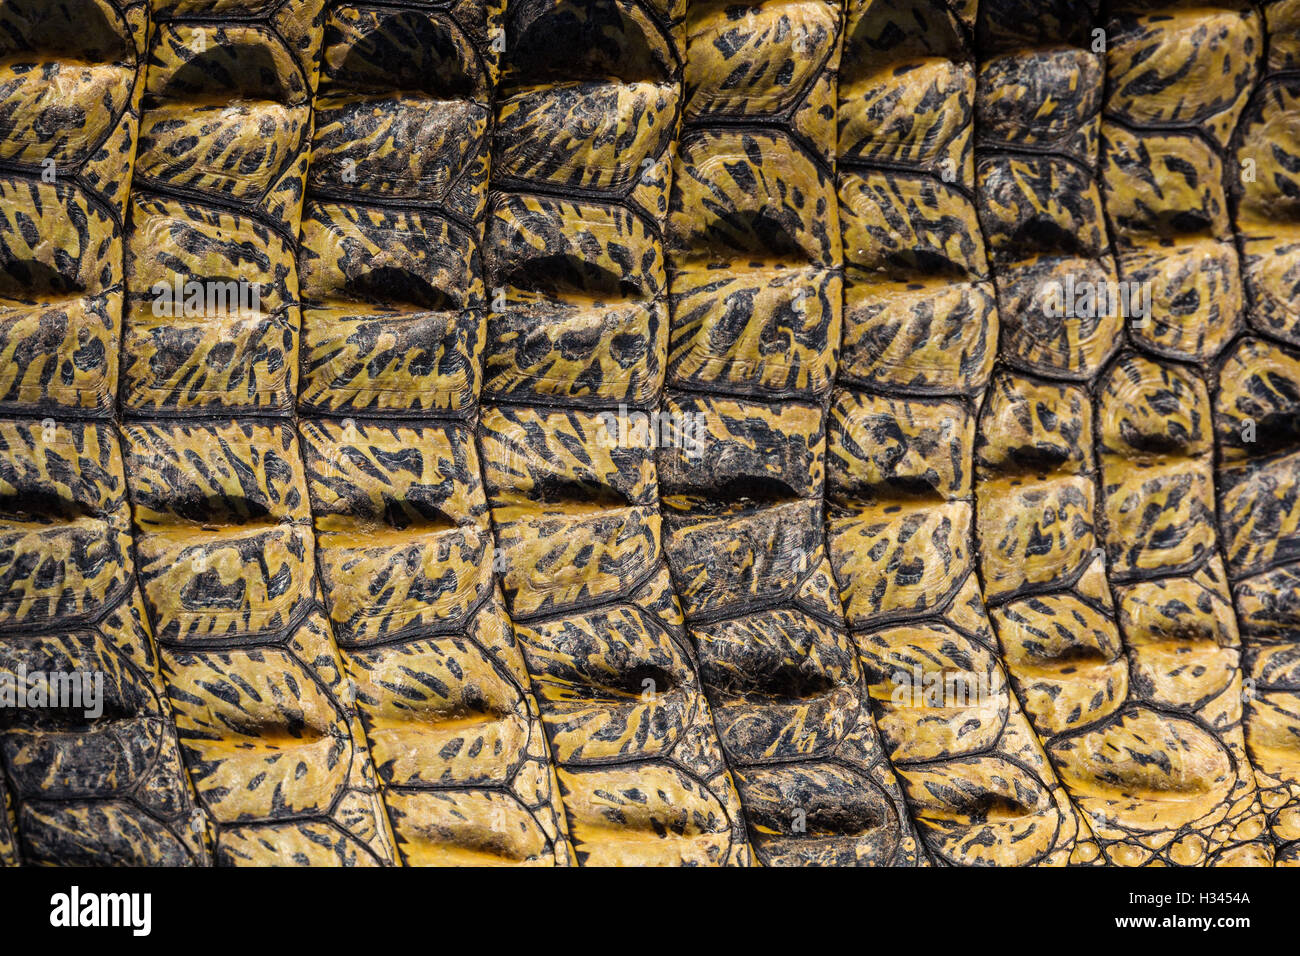 Vintage Green Crocodile Skin Texture Stock Photo, Picture And Royalty Free  Image. Image 13880261.